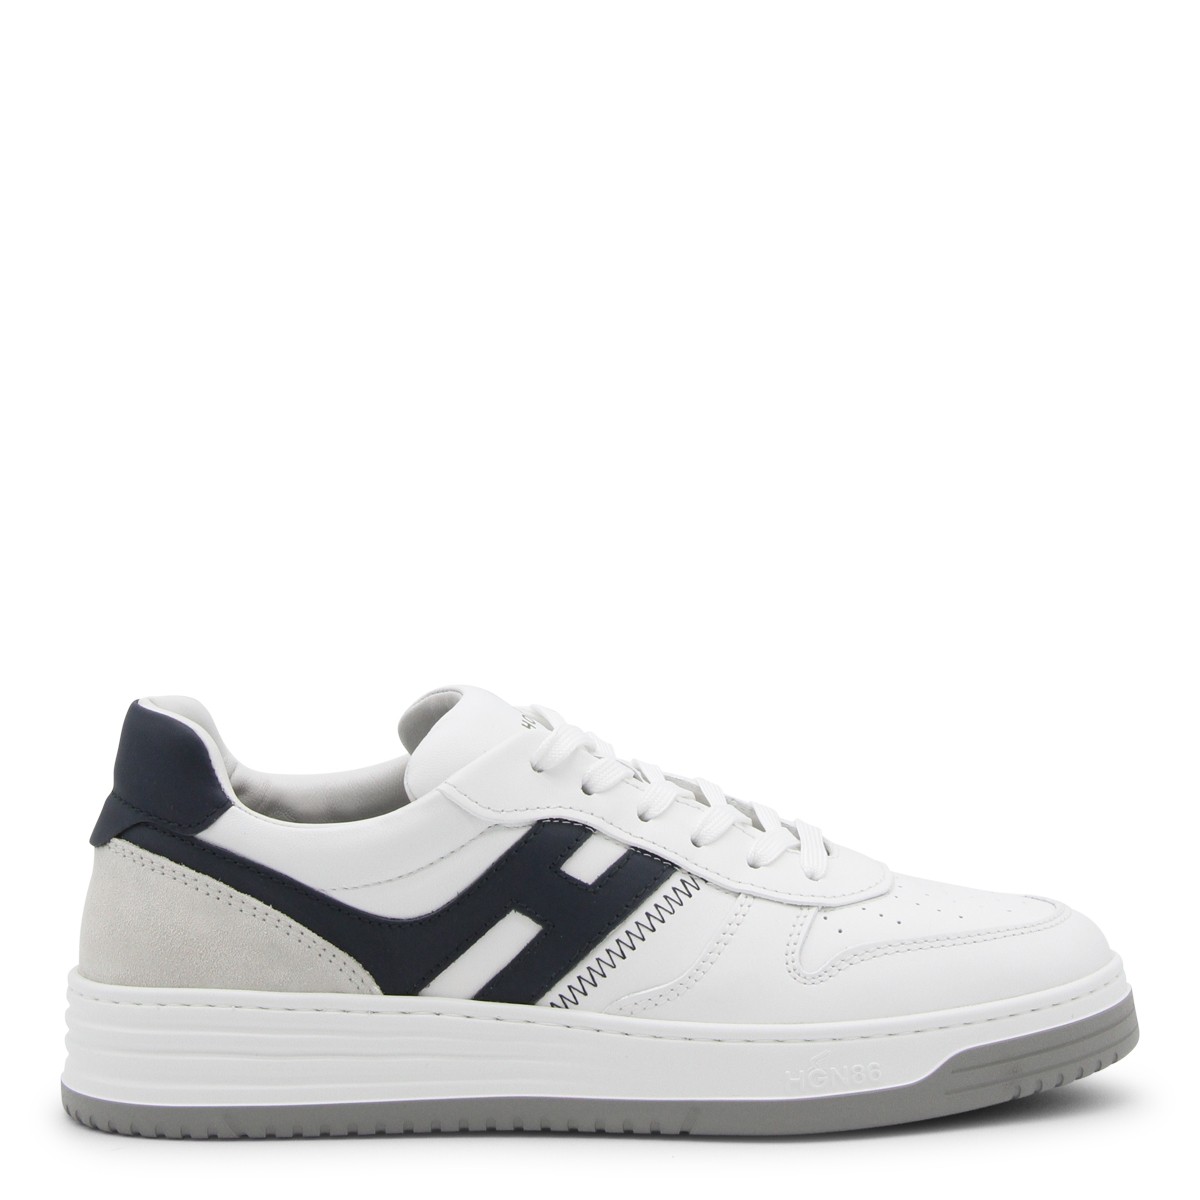 WHITE, GREY AND BLUE LEATHER H630 SNEAKERS